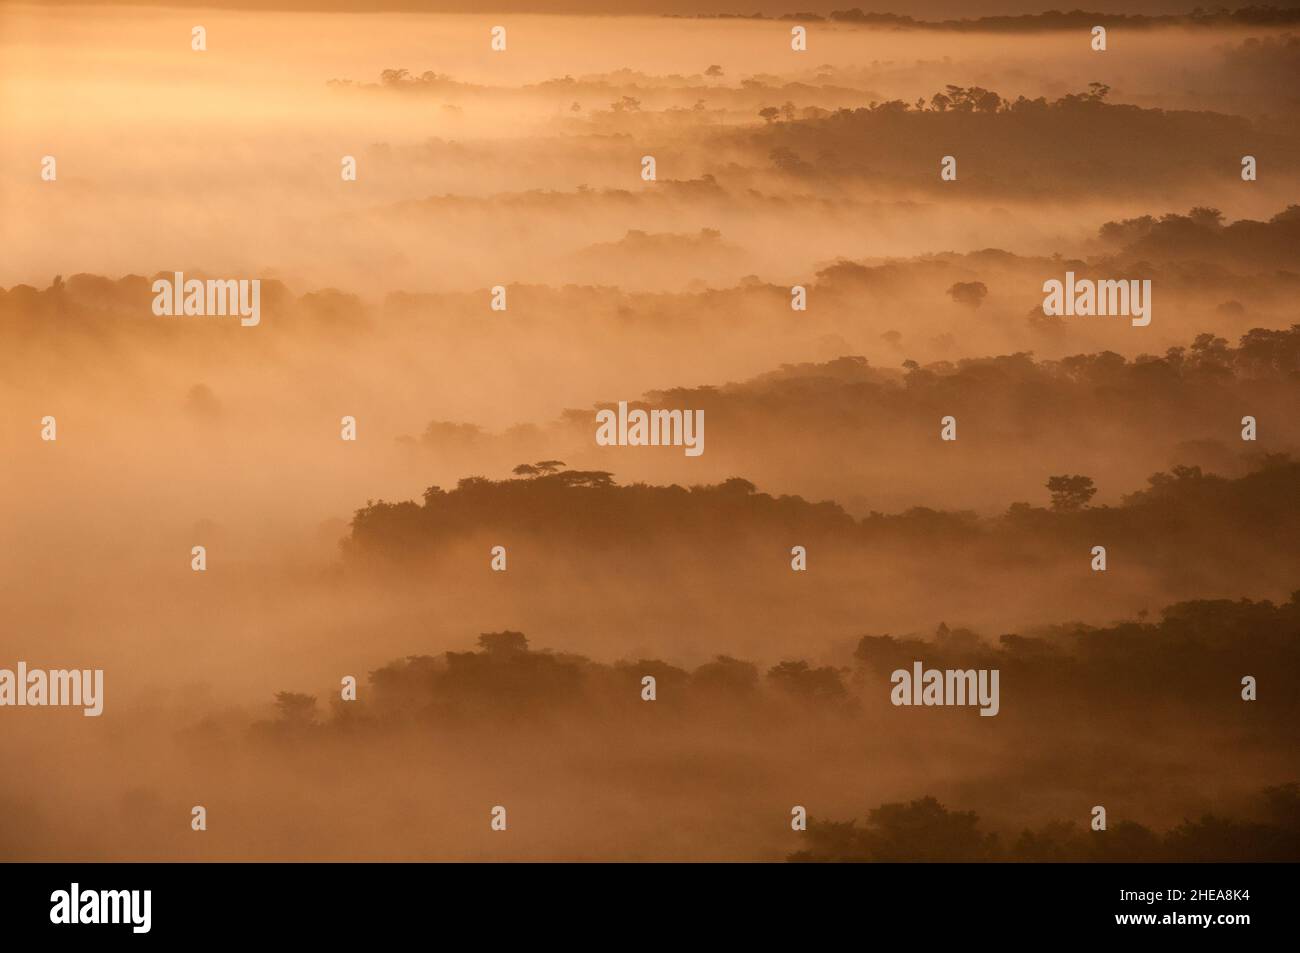 Early morning mist, Central Mozambique. Stock Photo